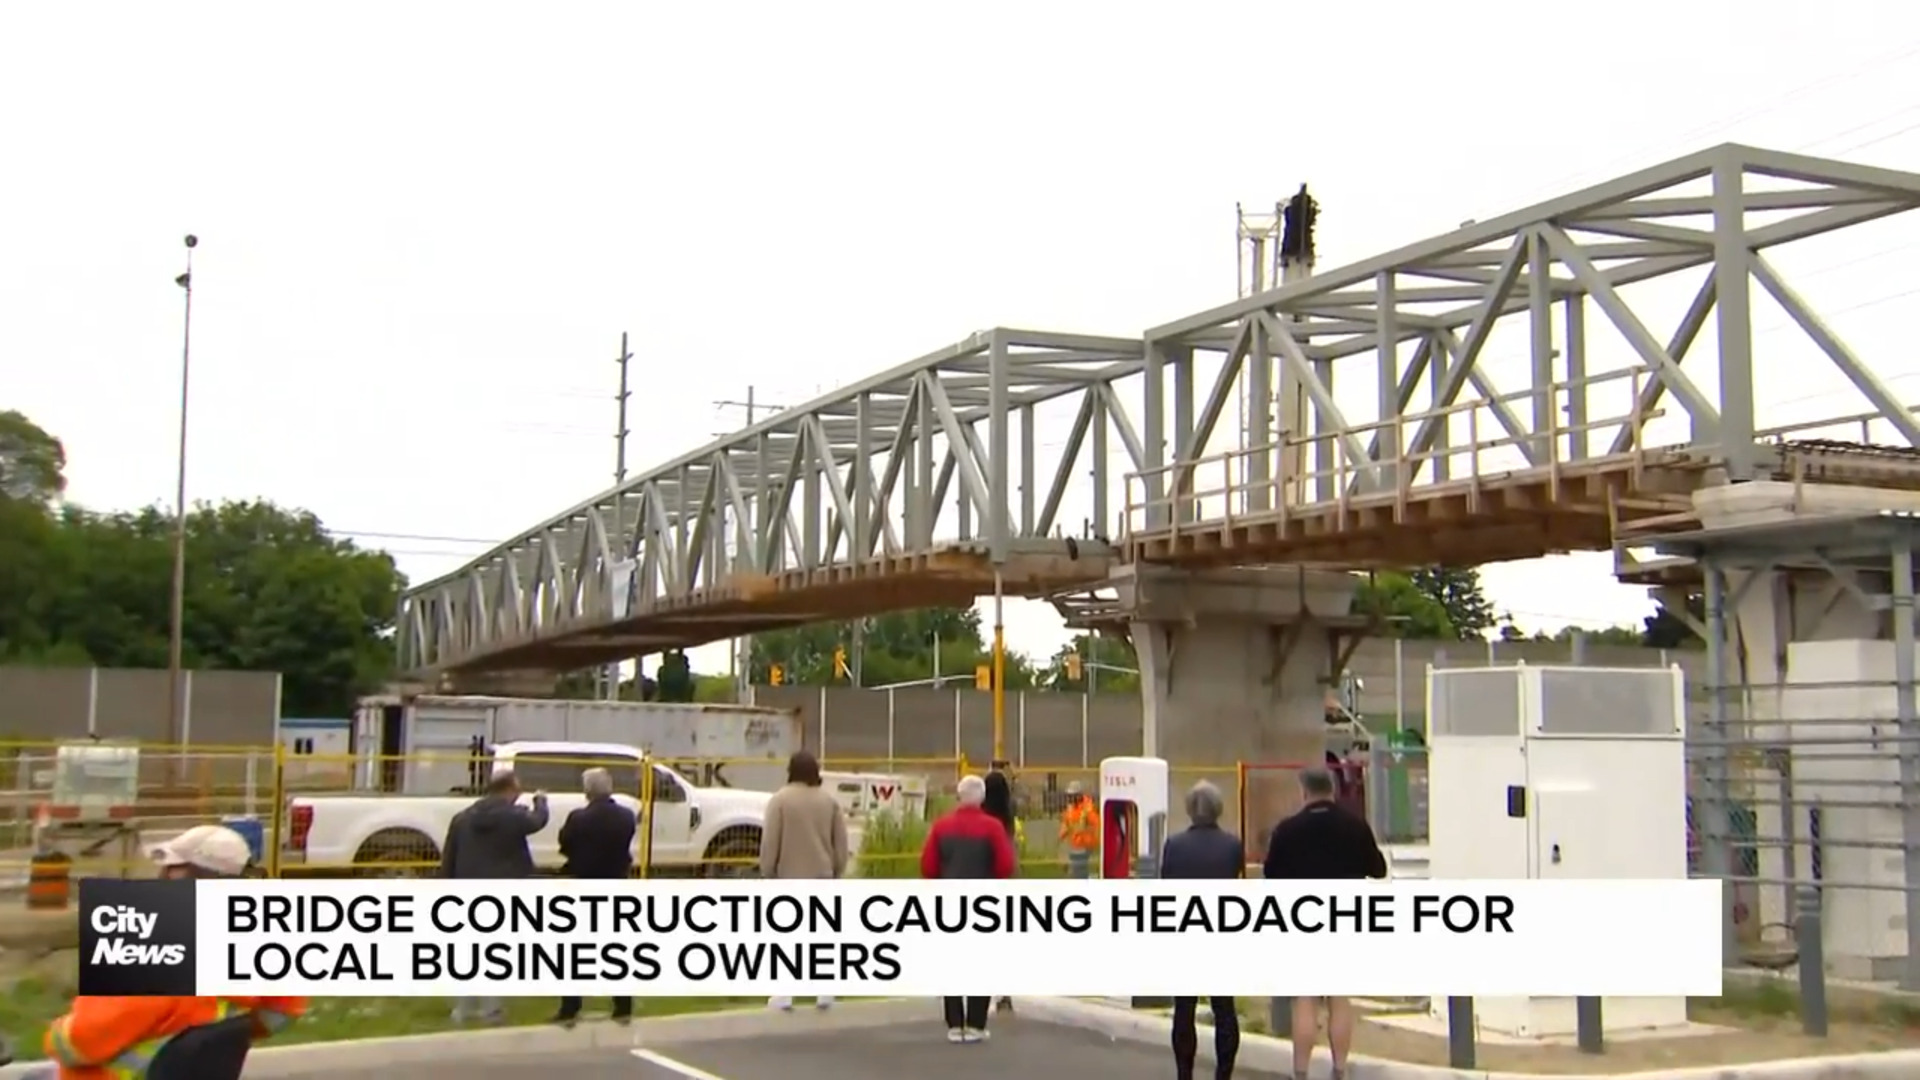 Bridge construction causing headache for local business owners